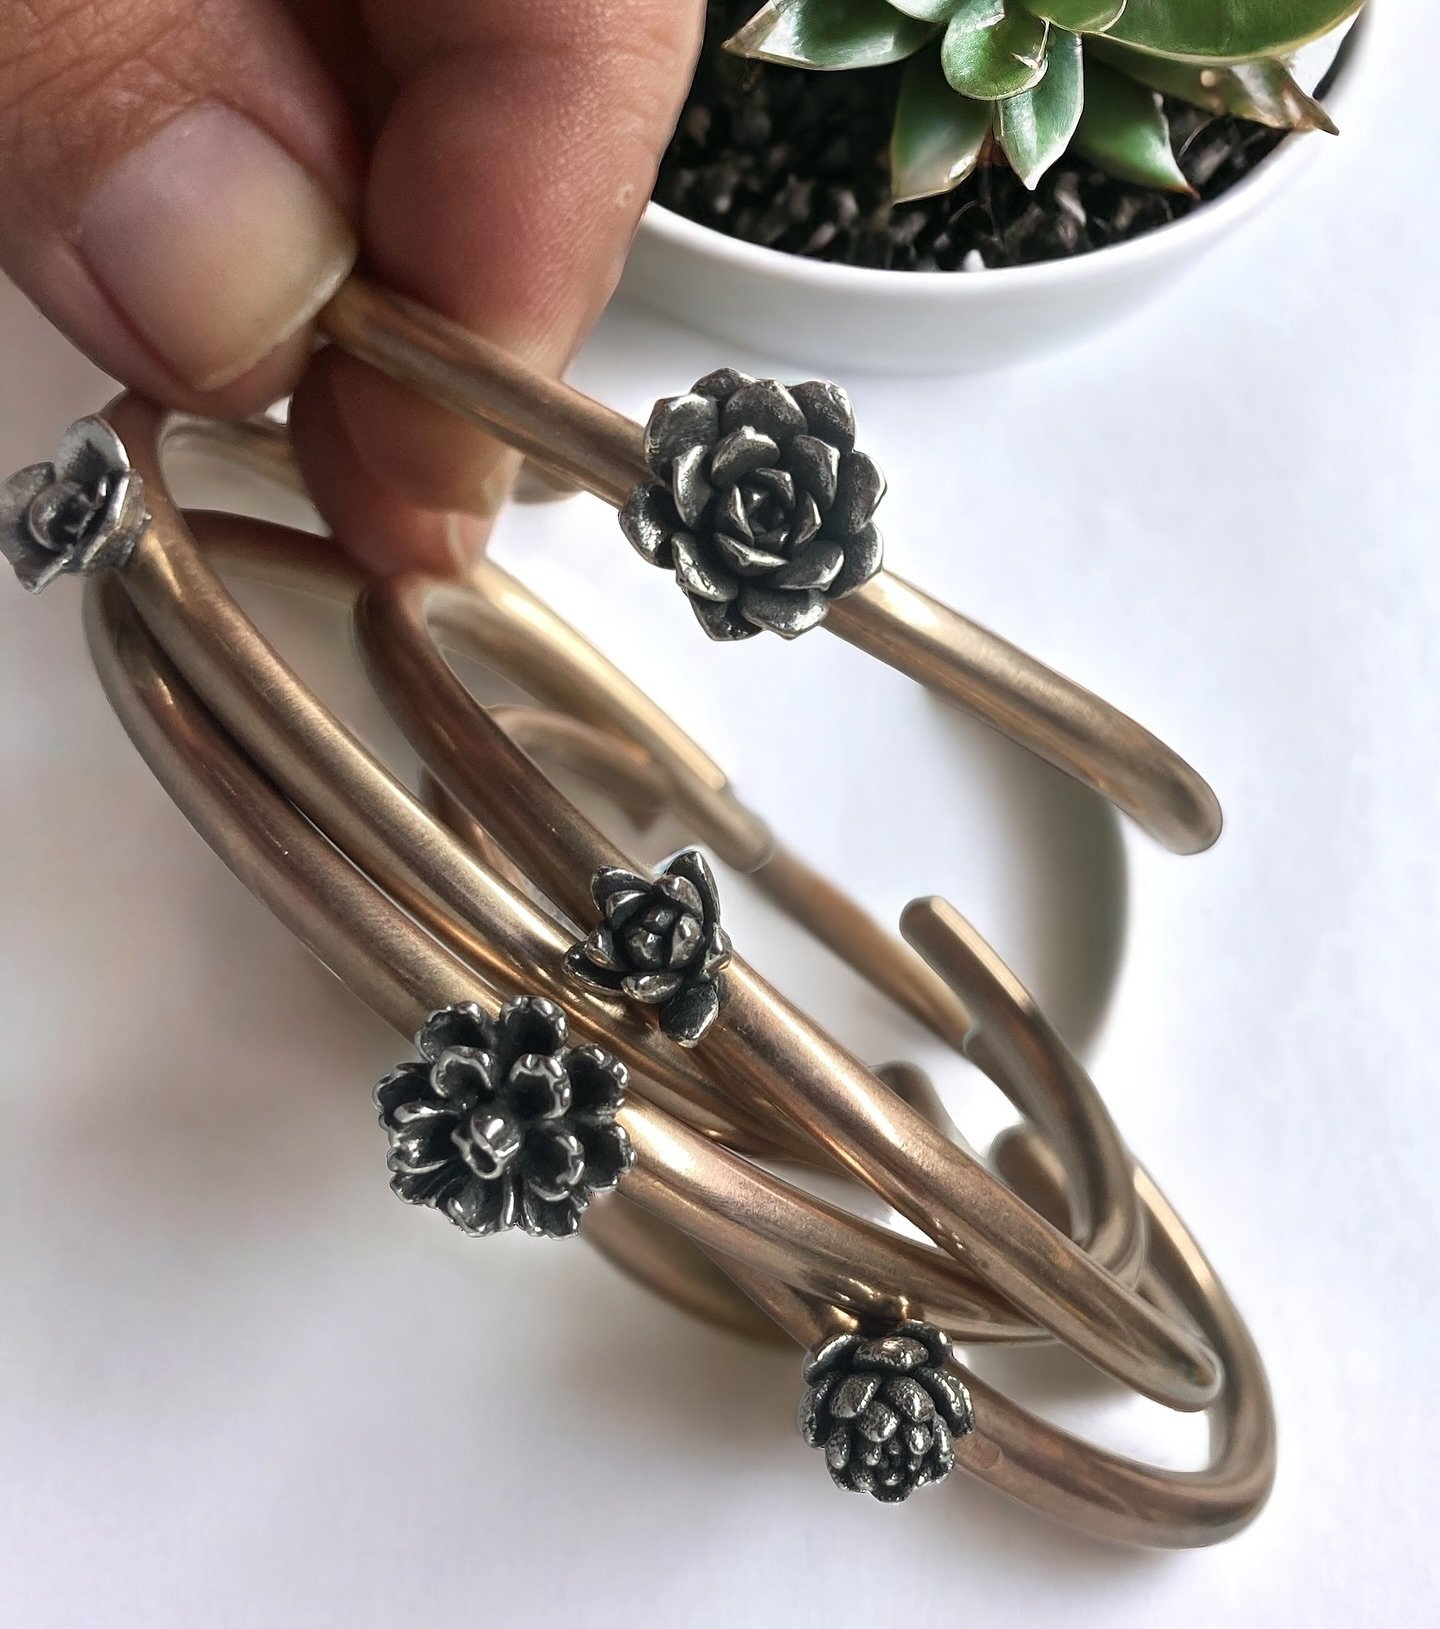 Hola! I have a few bronze cuffs with sterling silver succulents available immediately, they&rsquo;d make great Mother&rsquo;s Day gifts! DM if you&rsquo;d like one 🤗
$60 each.

#mothersday #missoula #missoulamt #umontana #montana #bigsky #gogriz #ma